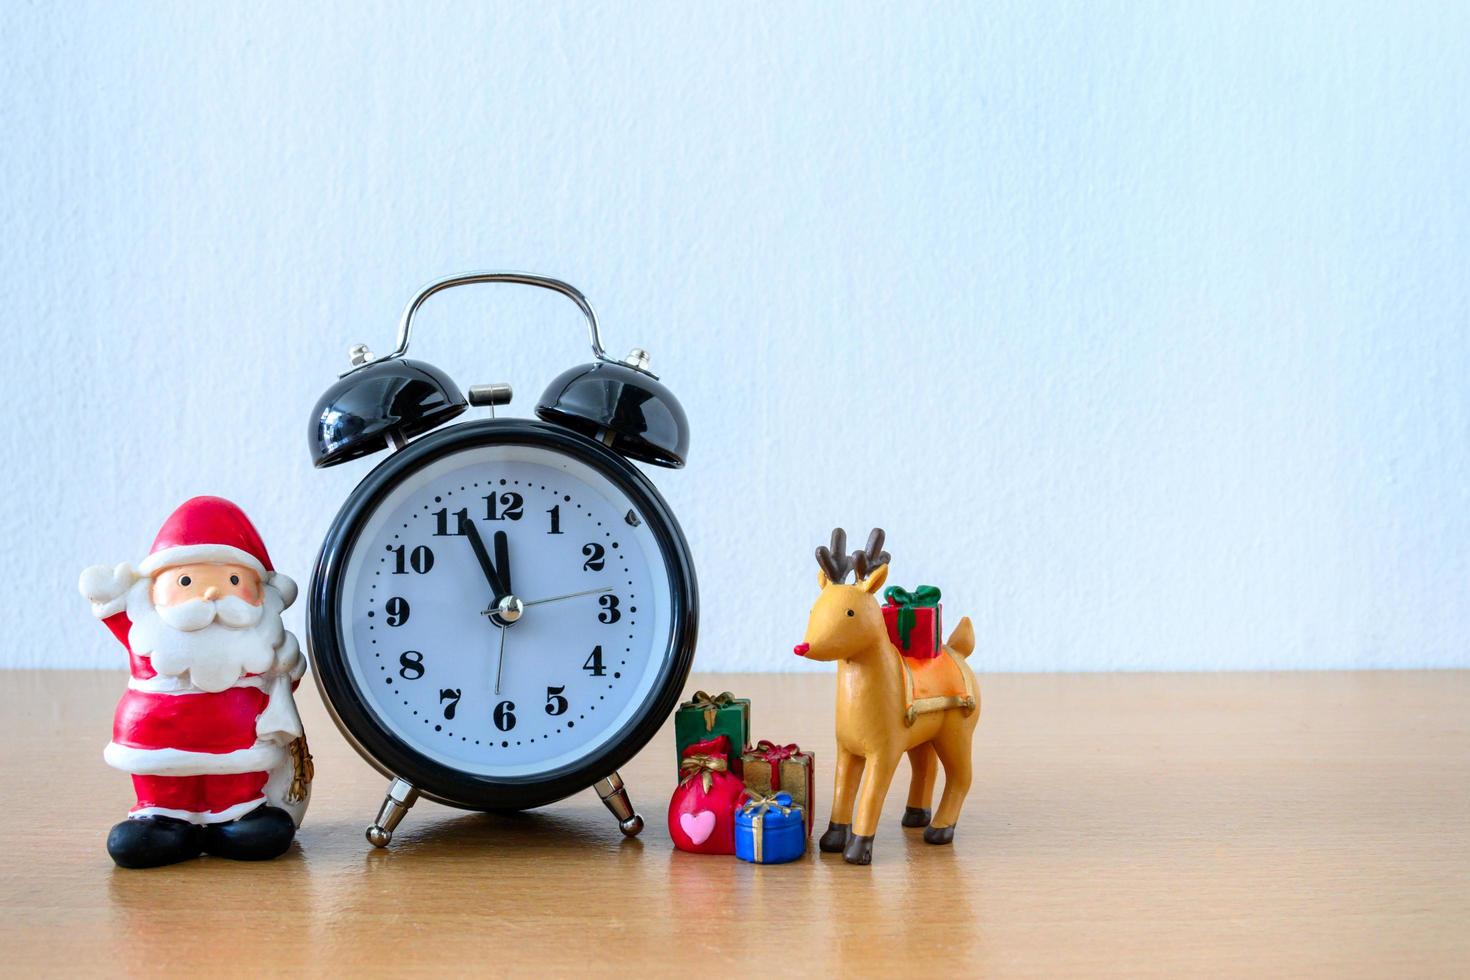 Santa Claus and clock, deer and gift on table. Happy New Year and Xmas Concept photo